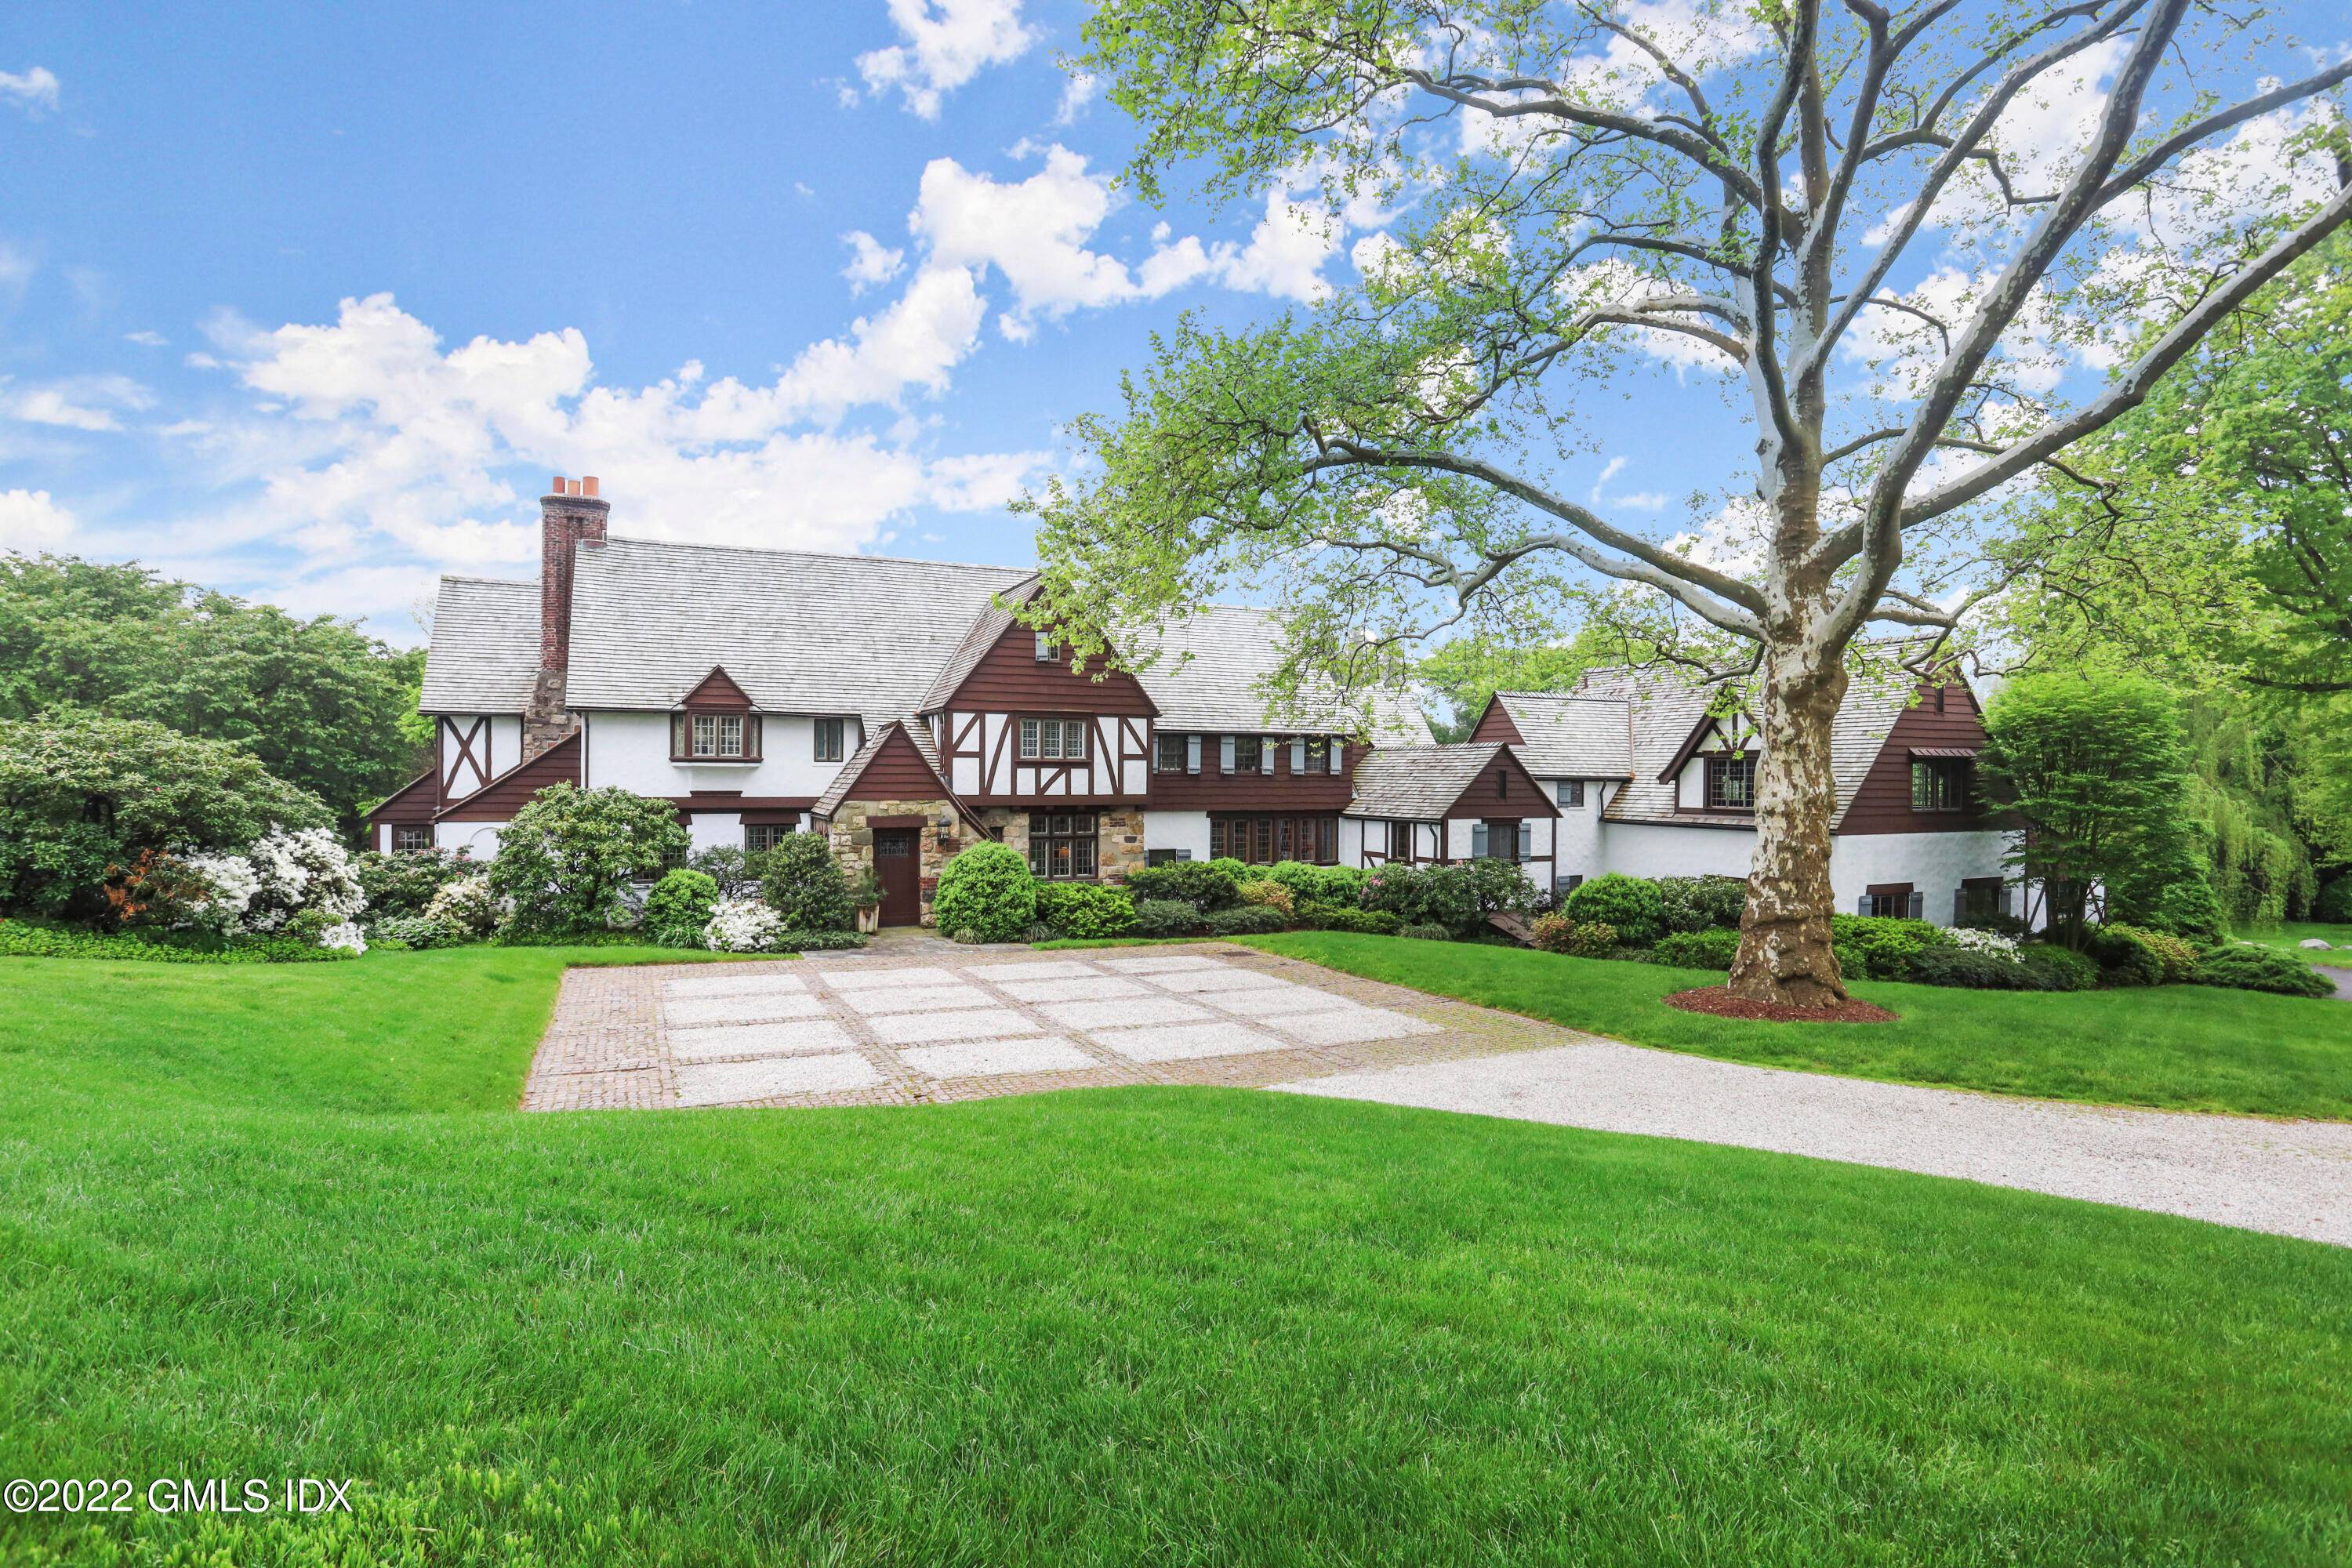 Belle Haven Peninsula Exquisite architectural details combined with modern updates characterize this charming six bedroom English Manor set back on 1.